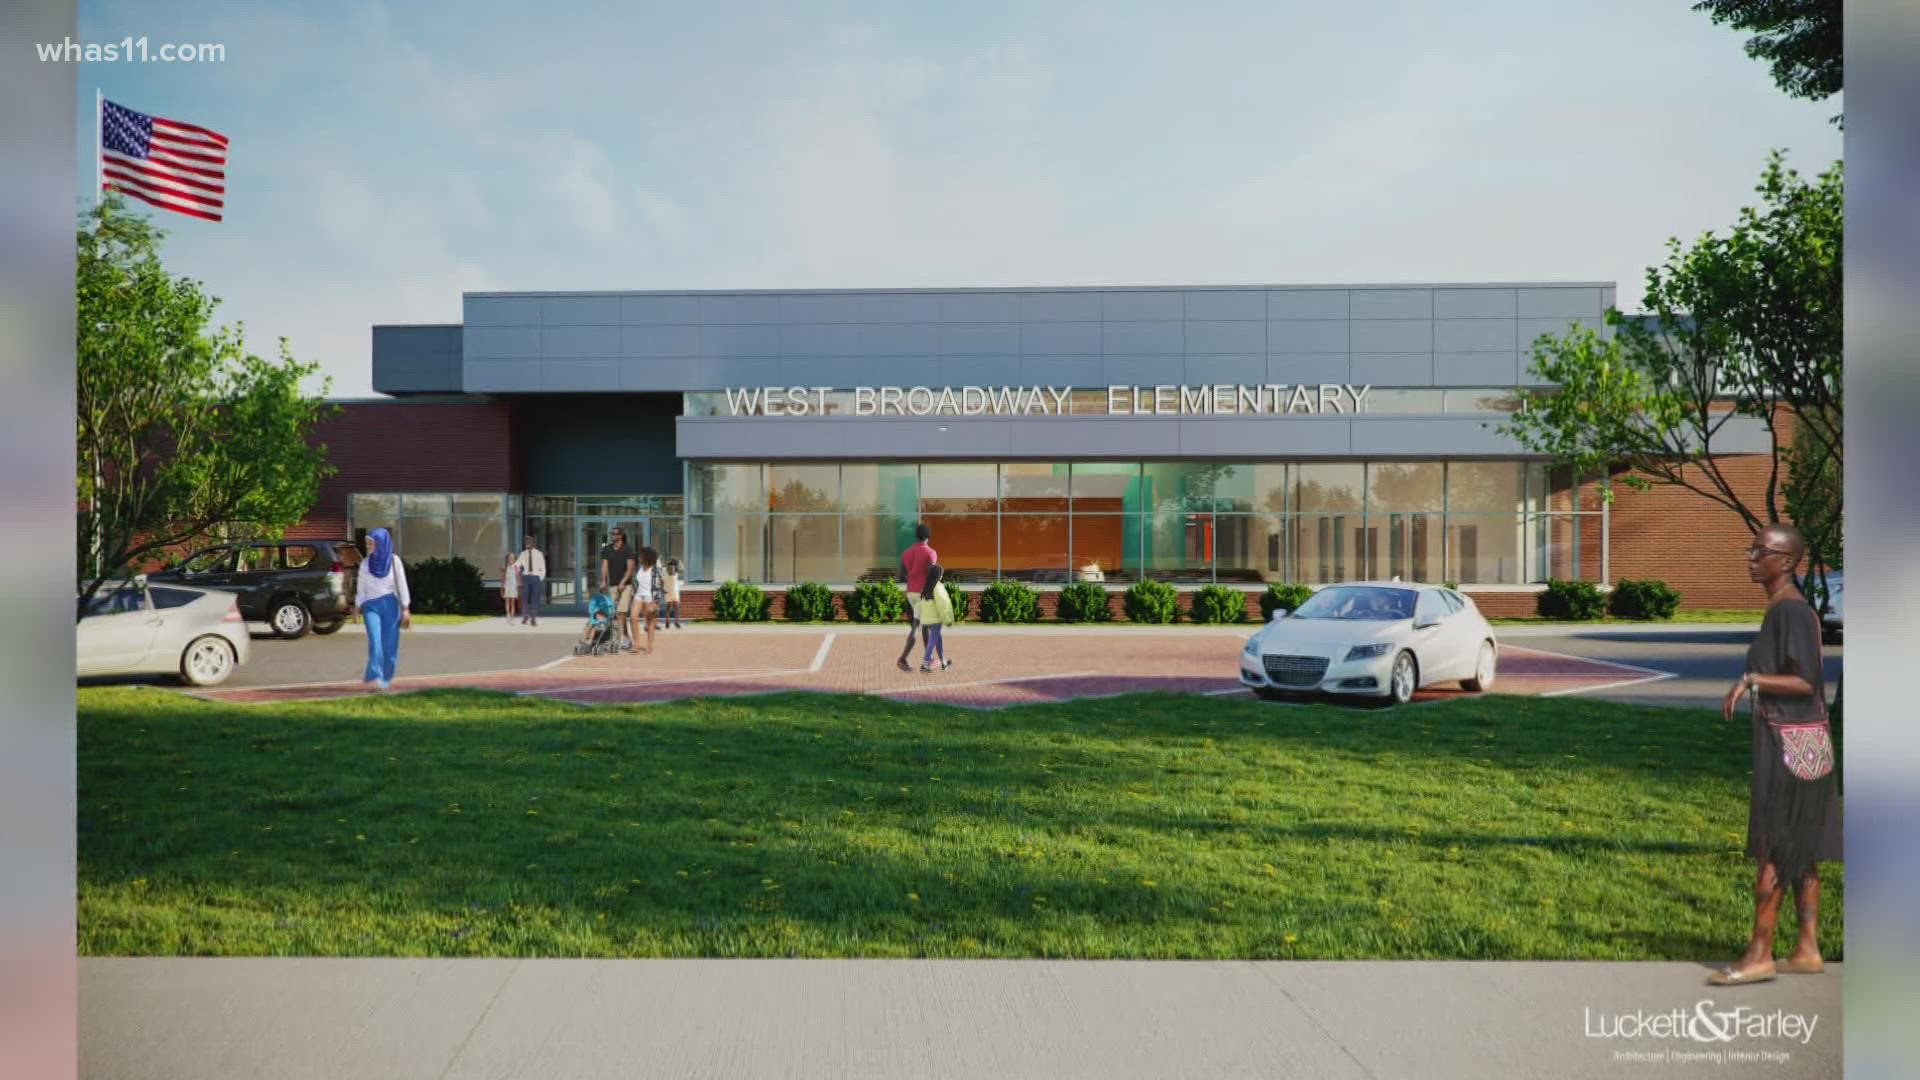 The 80,000 sq. foot state-of-the-art facility will fit around 800 students. Kids from Wheatley and Roosevelt Perry Elementary will also be able to attend.